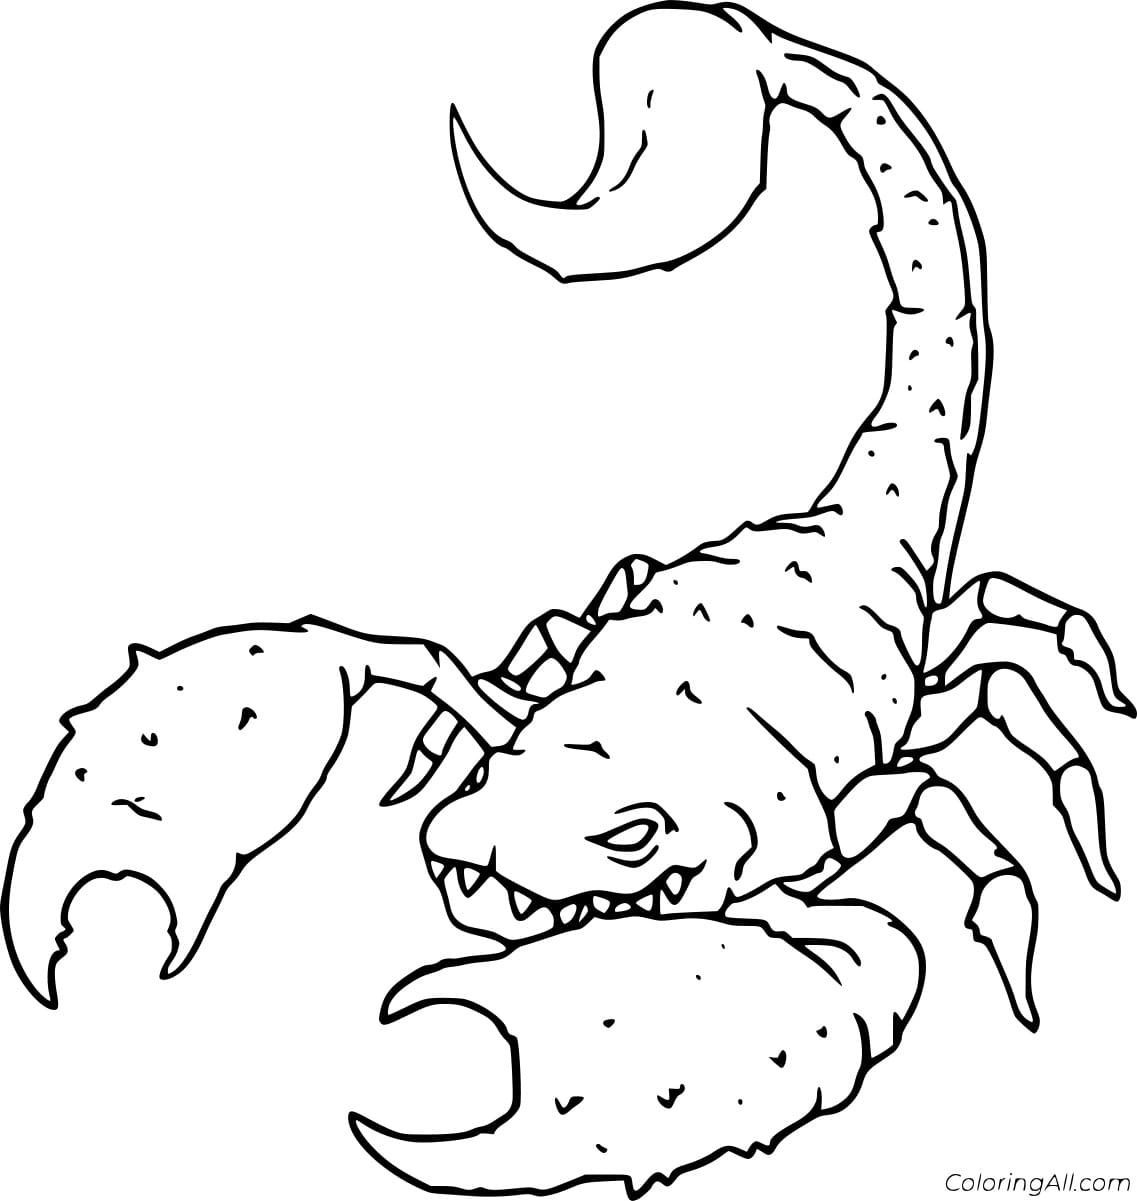 Easy Realistic Scorpion Free Printable Coloring Page